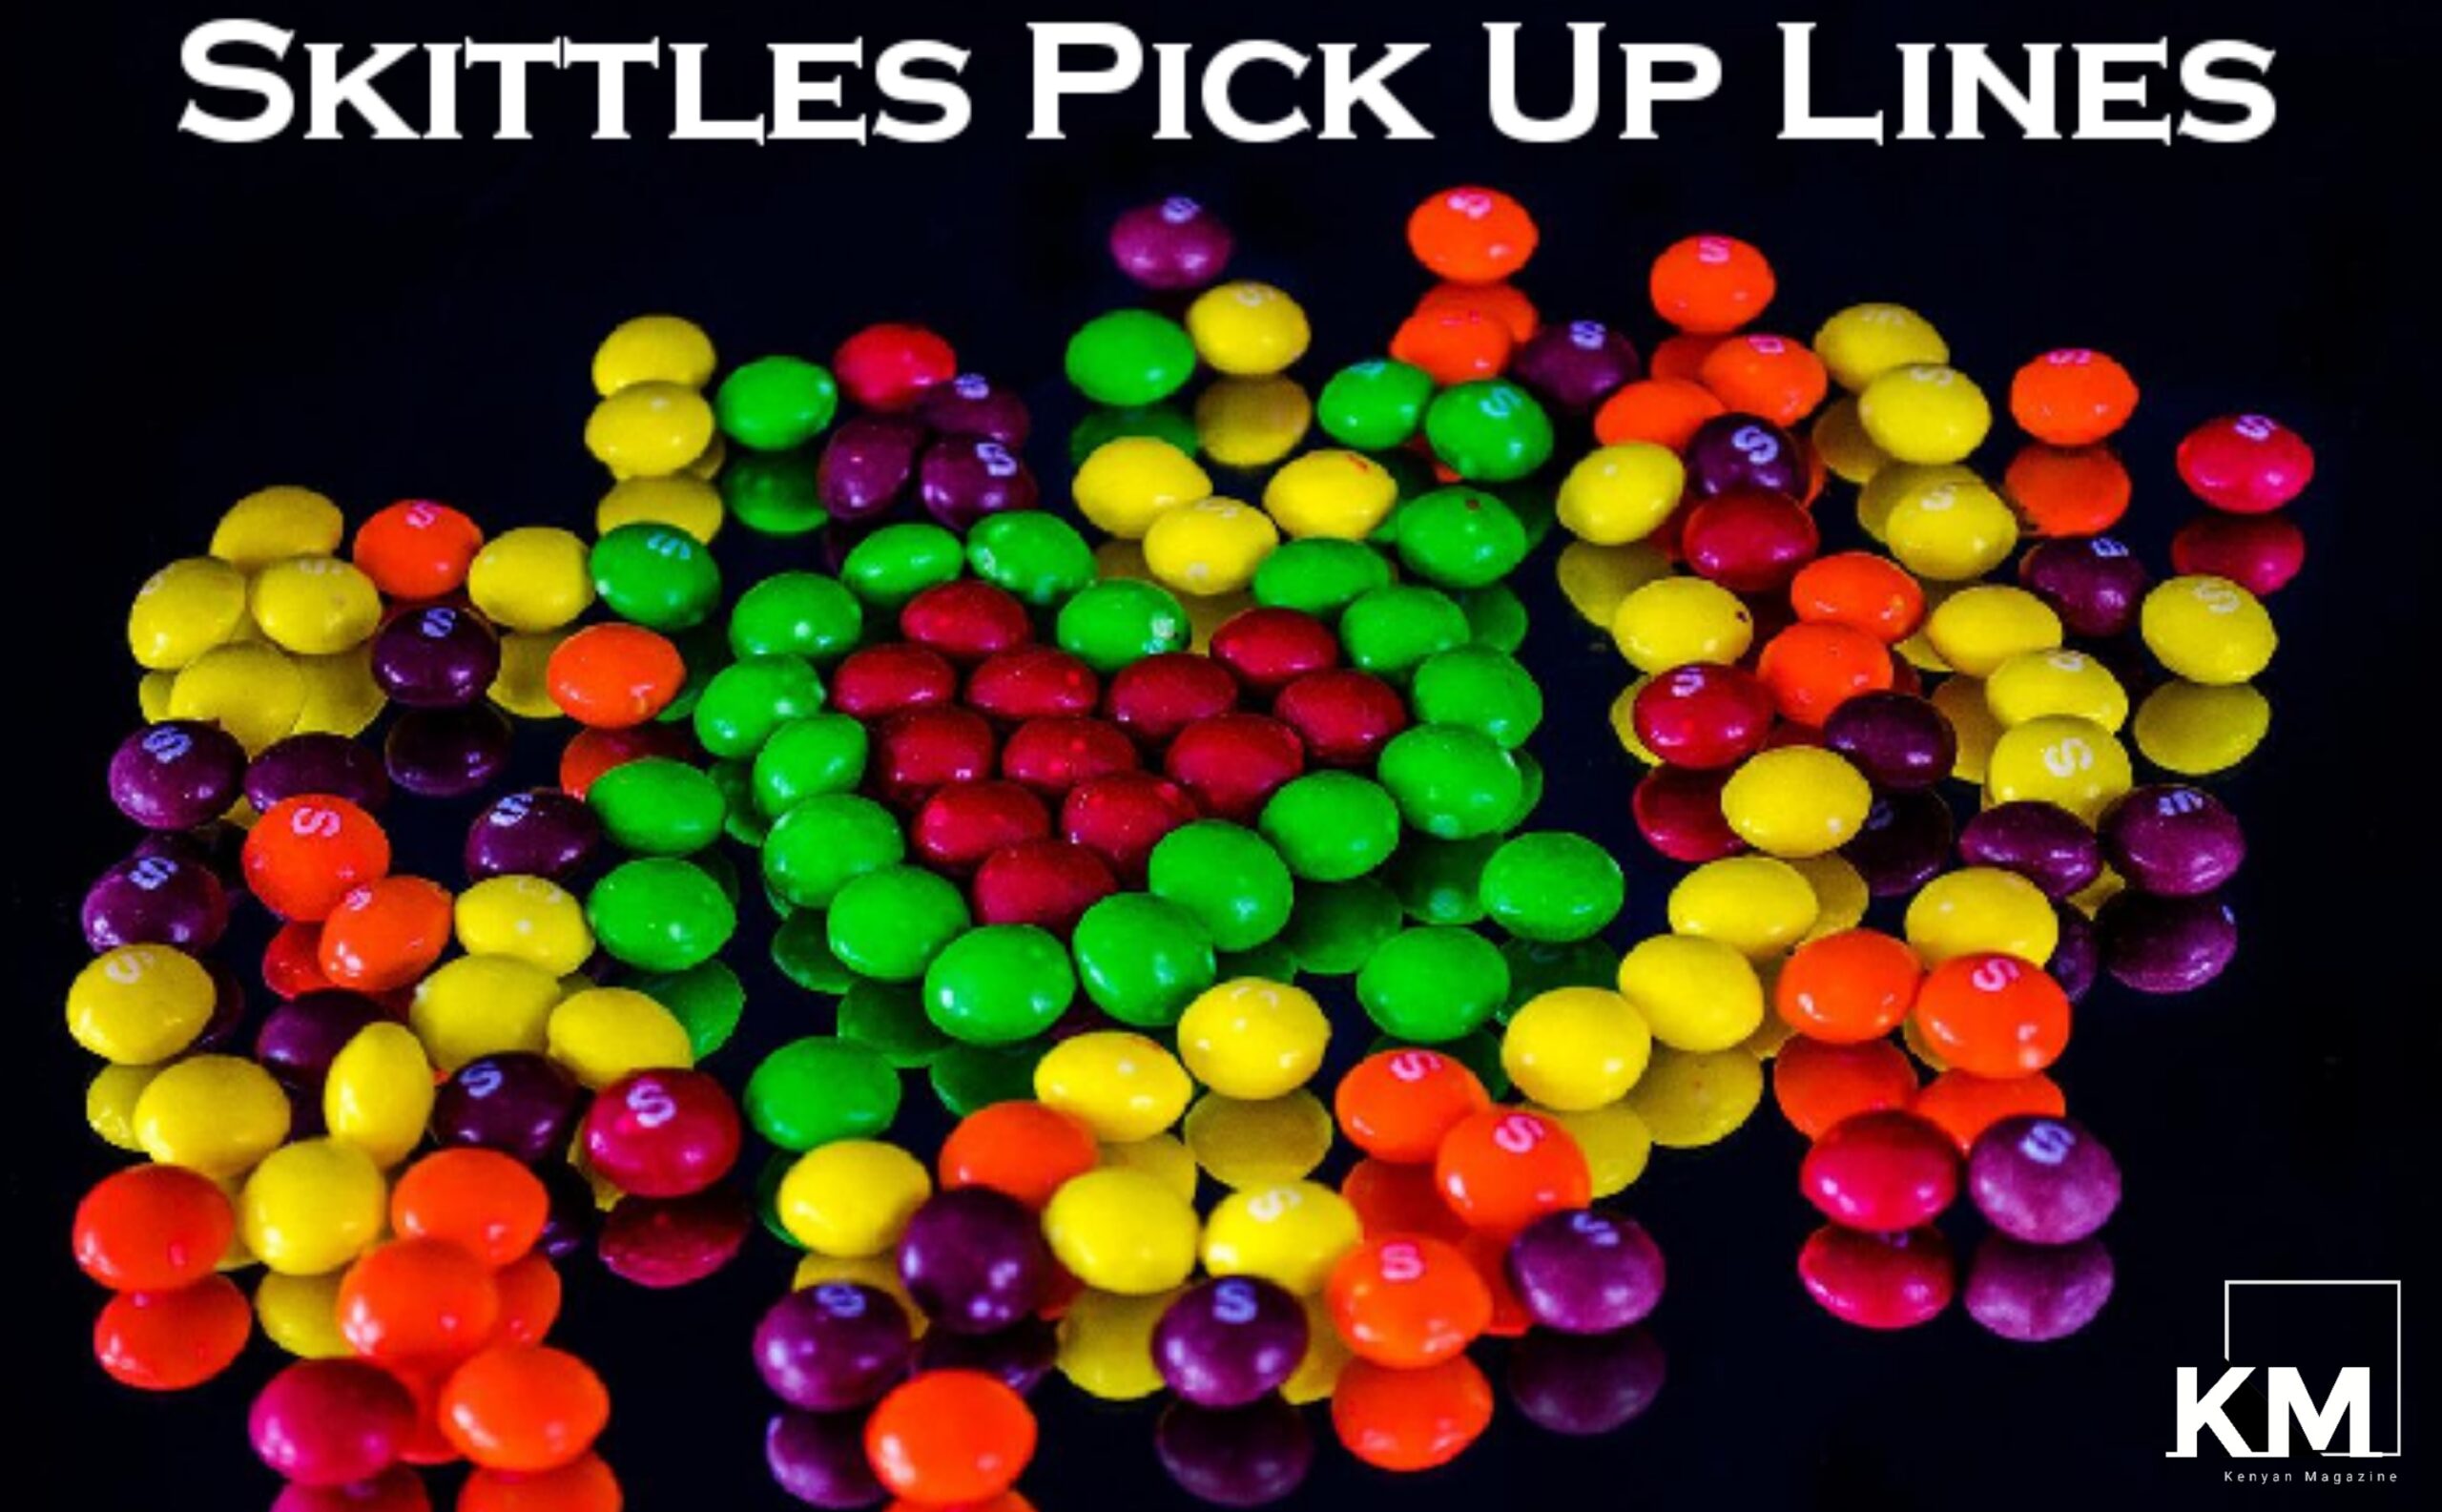 Skittles Pick up lines